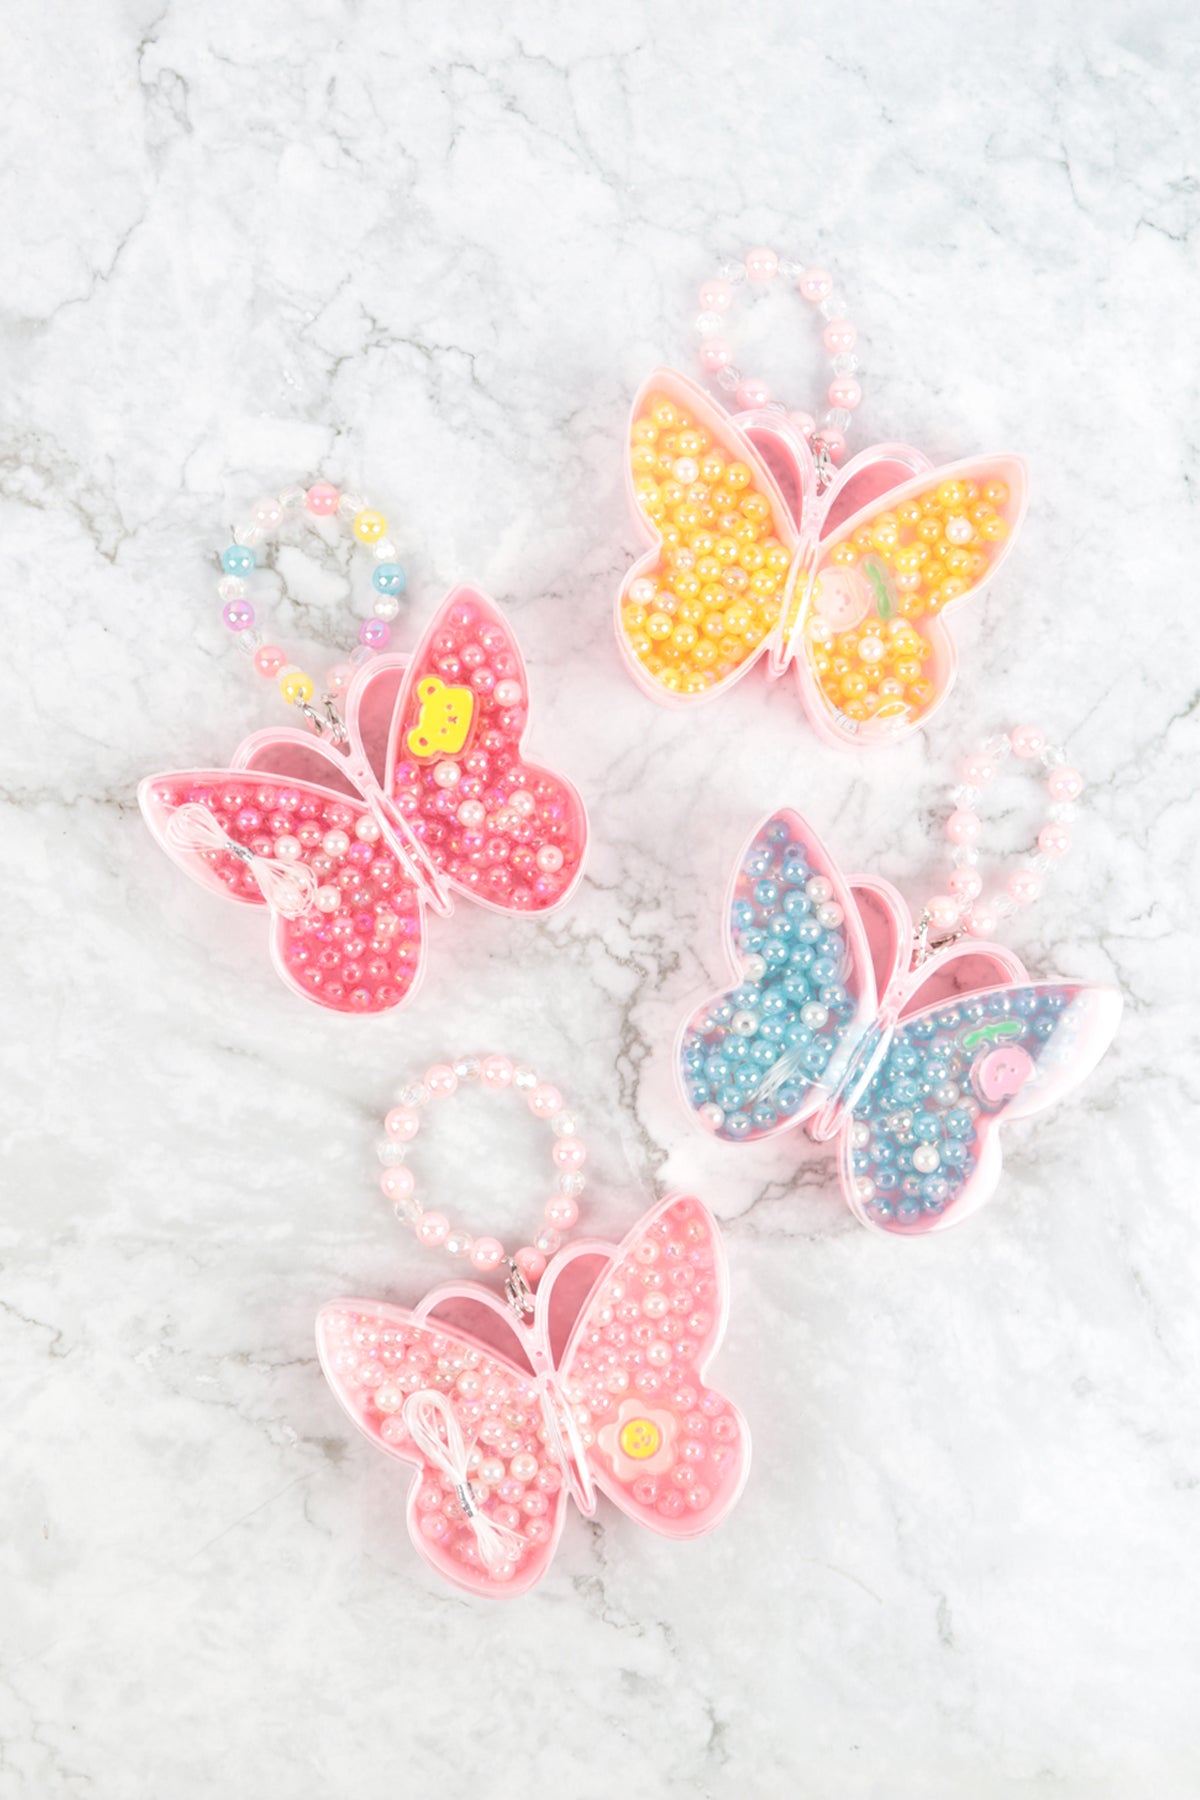 DIY BUTTERFLY NECKLACE OR BRACELET PEARL BEADS HANCRAFTED TOY JEWELRY-MULTICOLOR